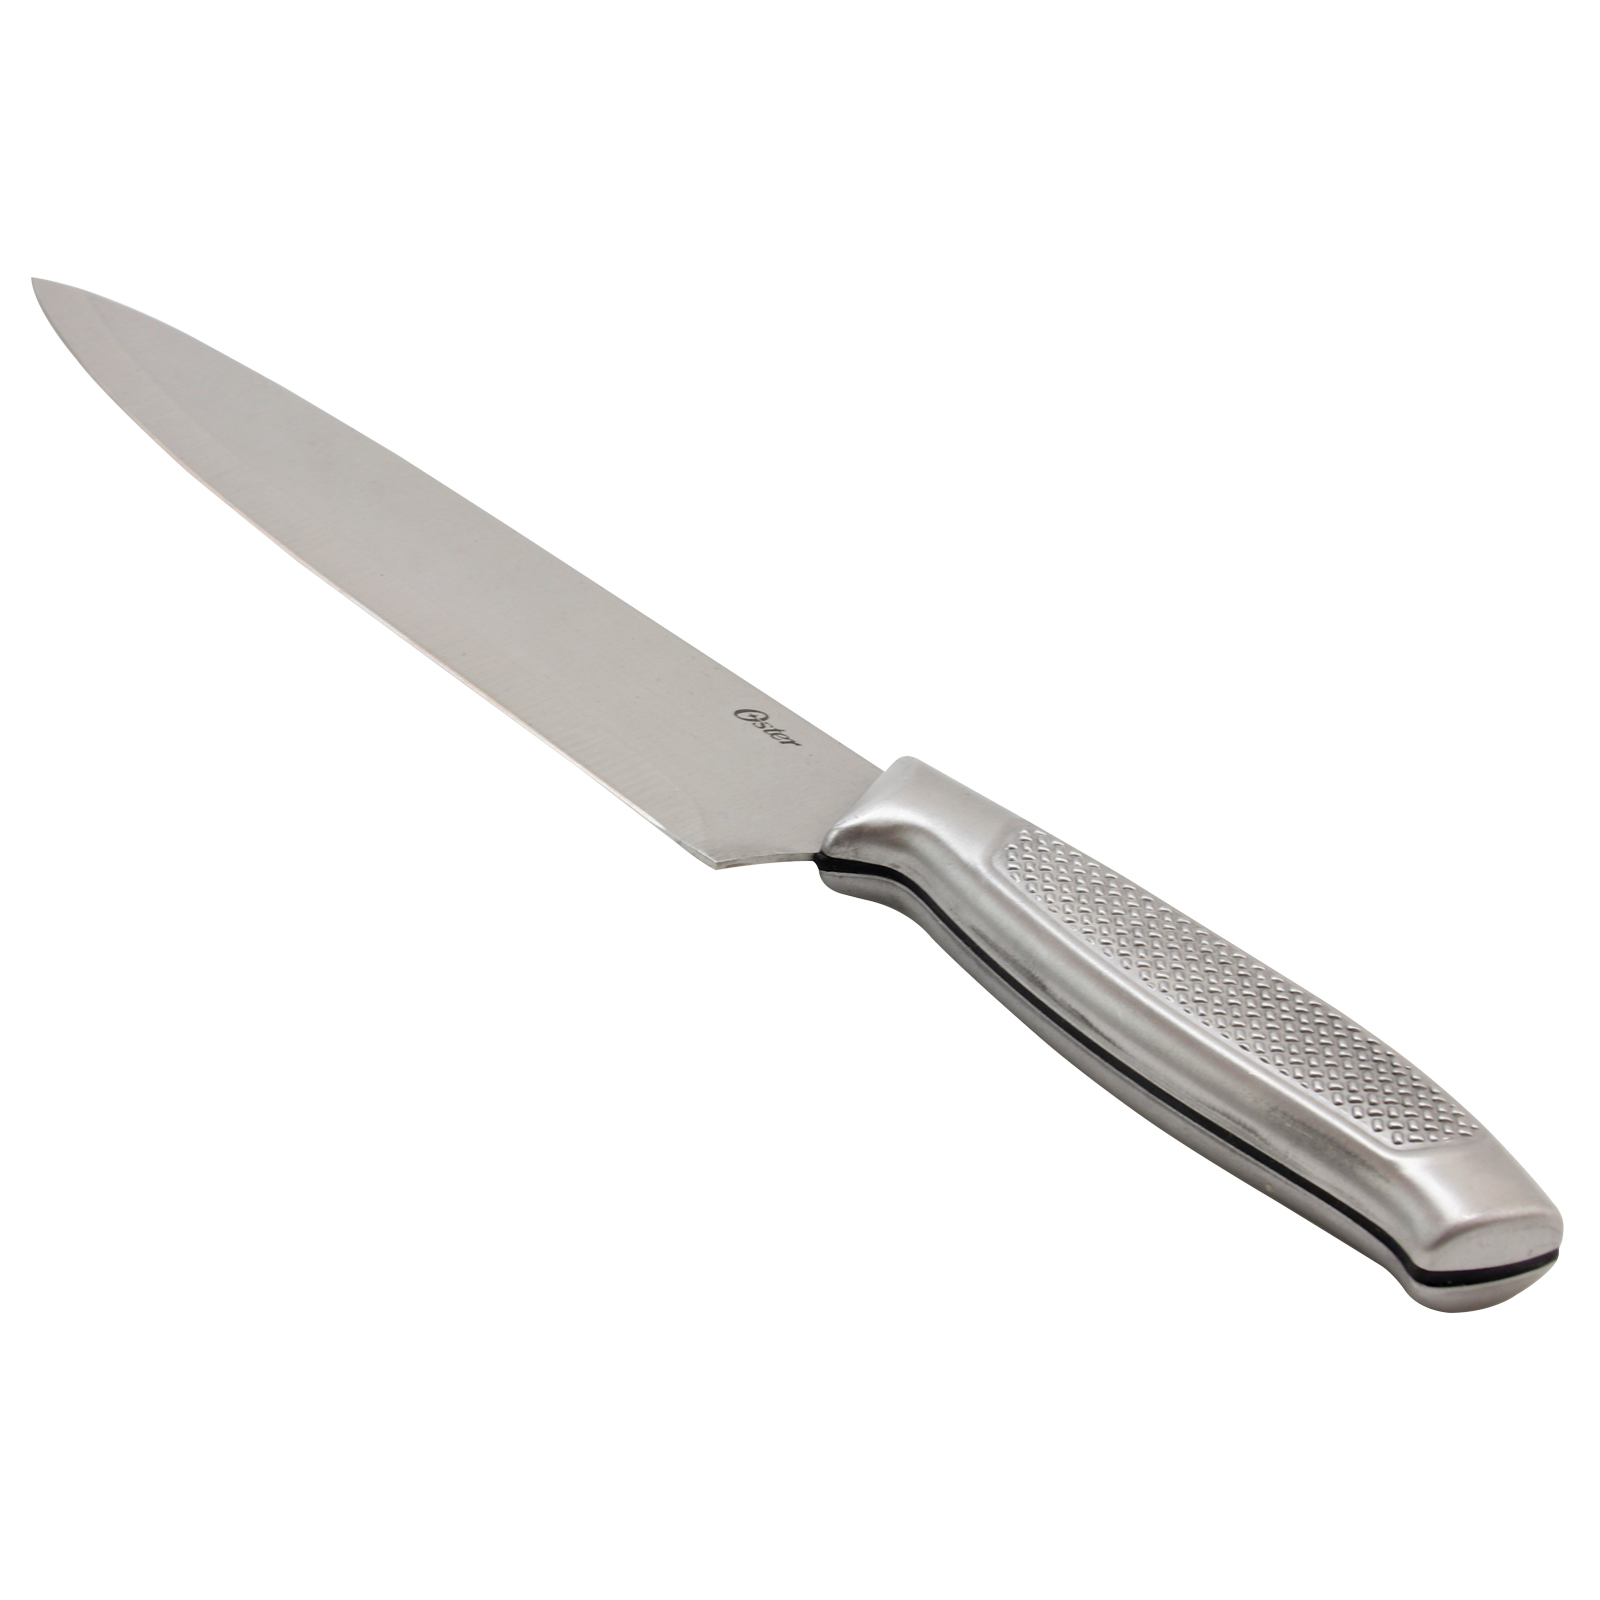 Oster Edgefield 8 inch Chef Knife